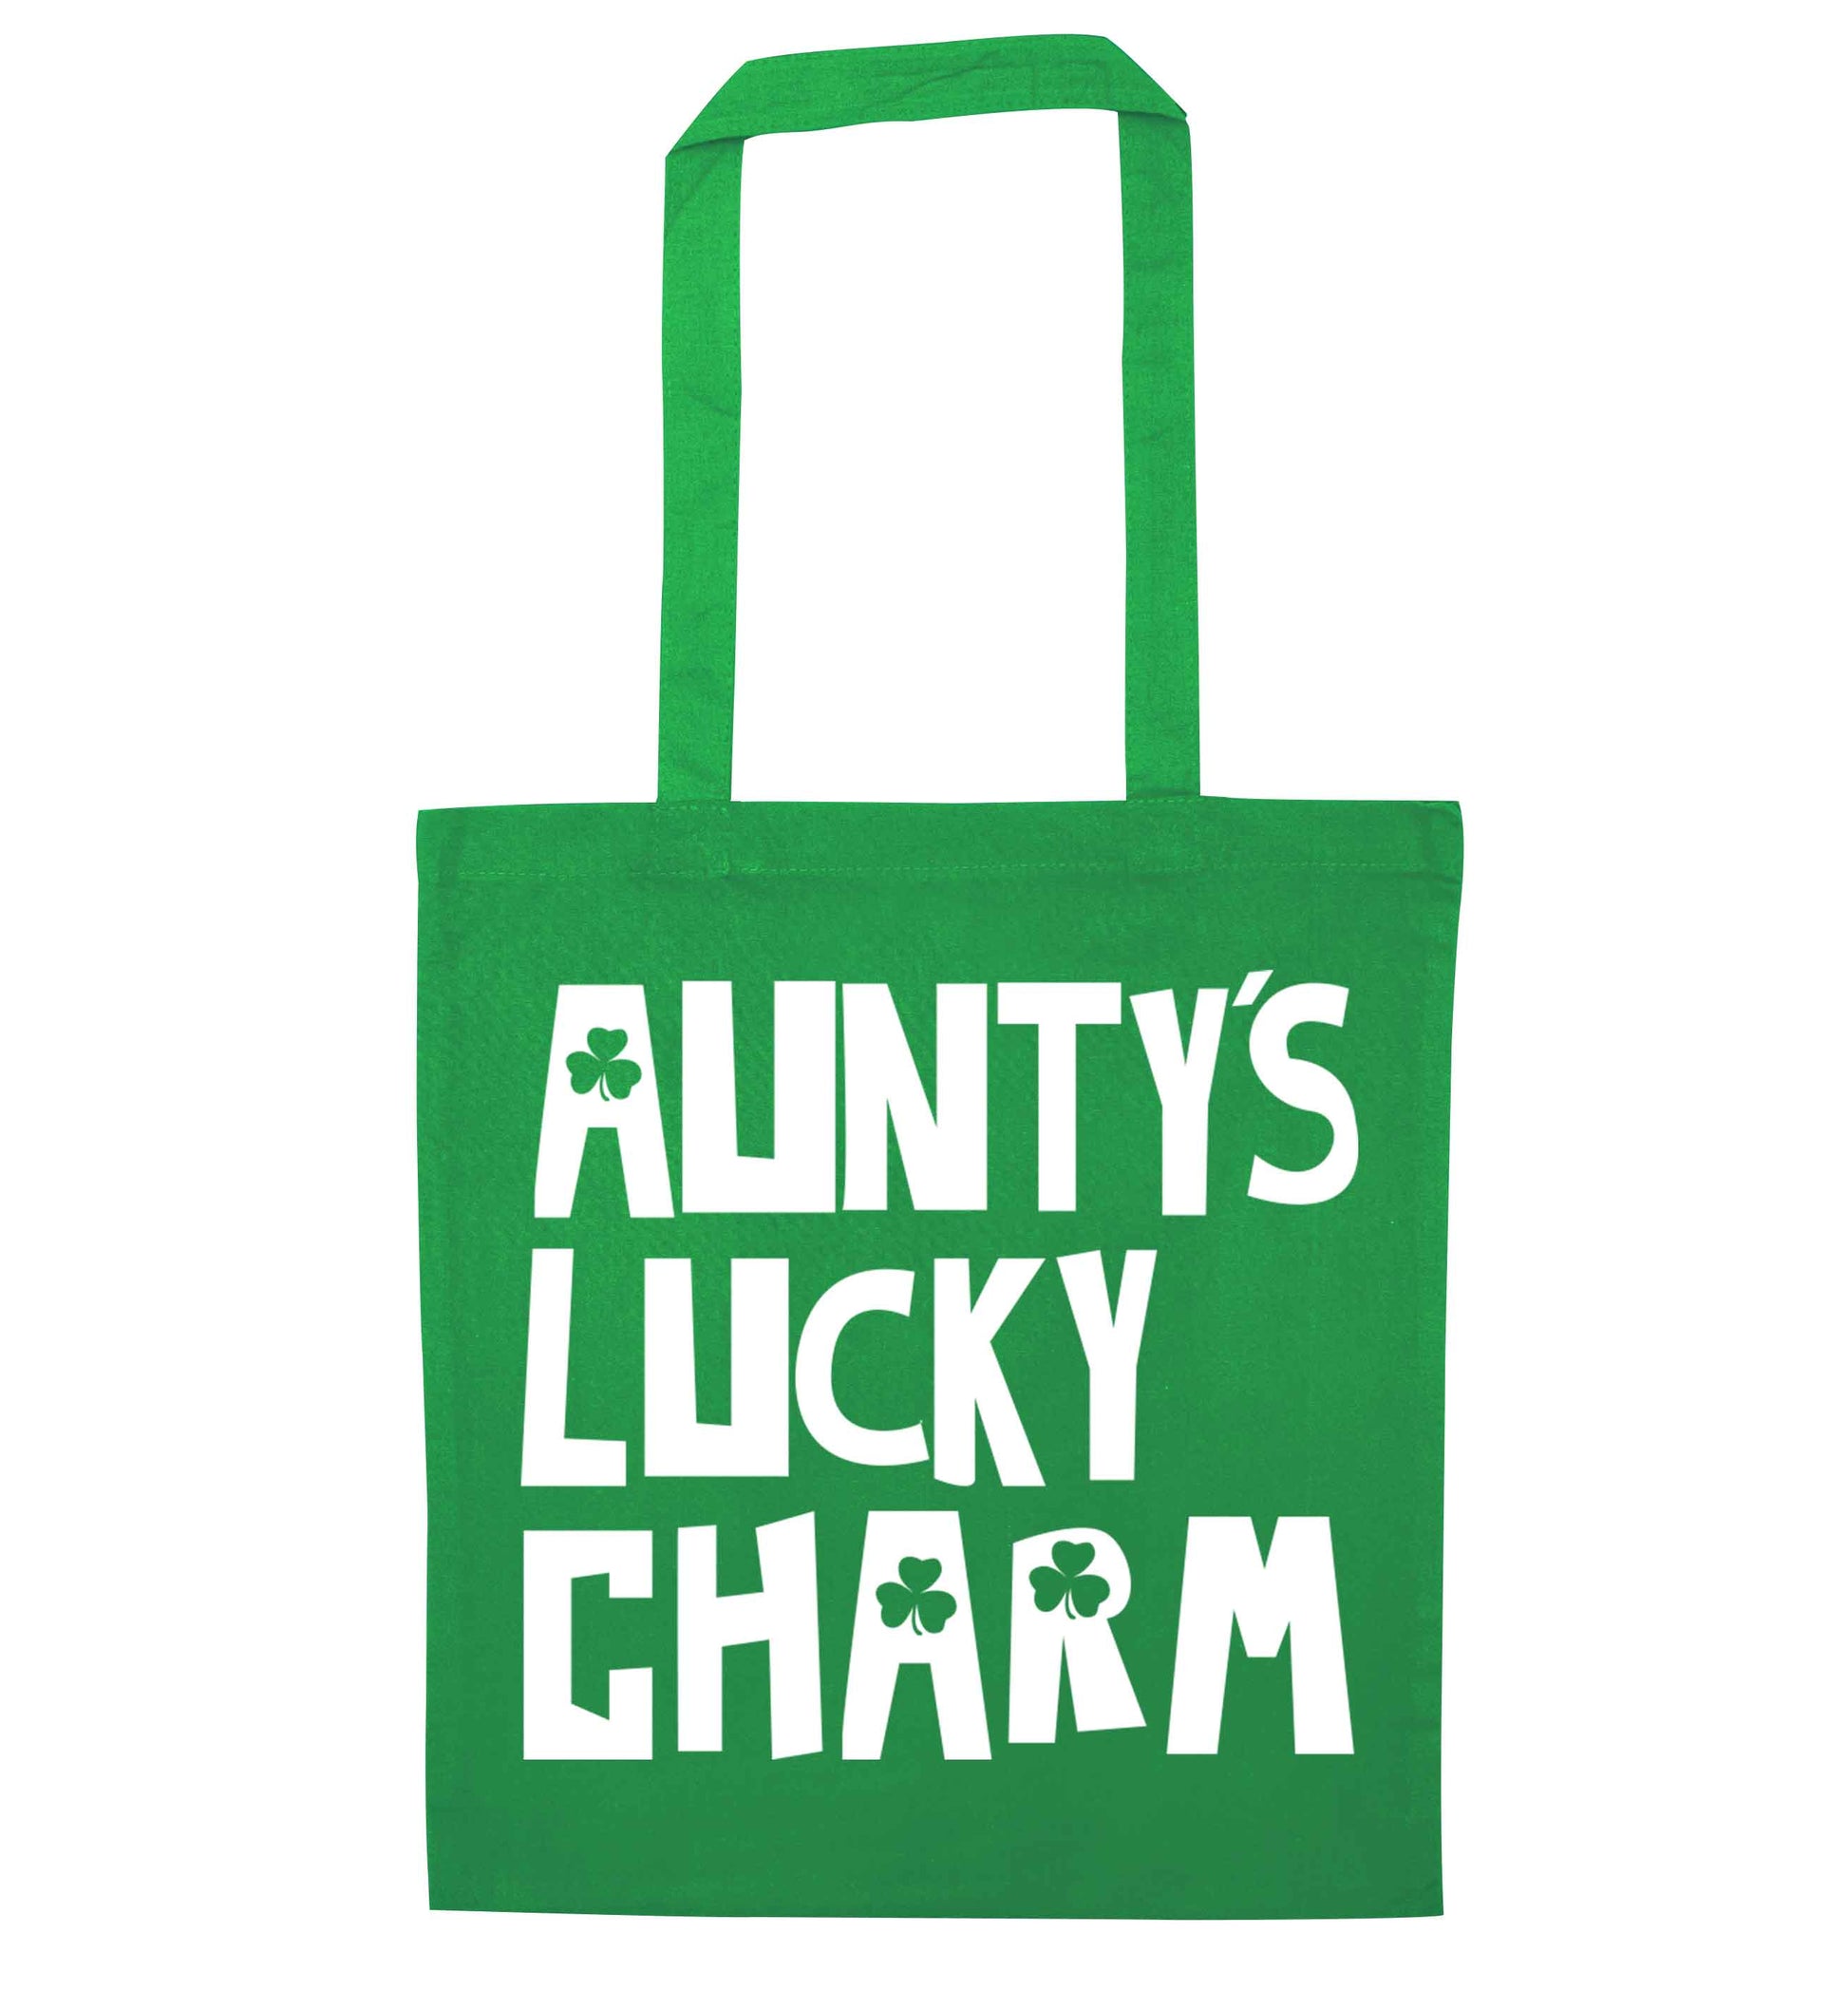 Aunty's lucky charm green tote bag